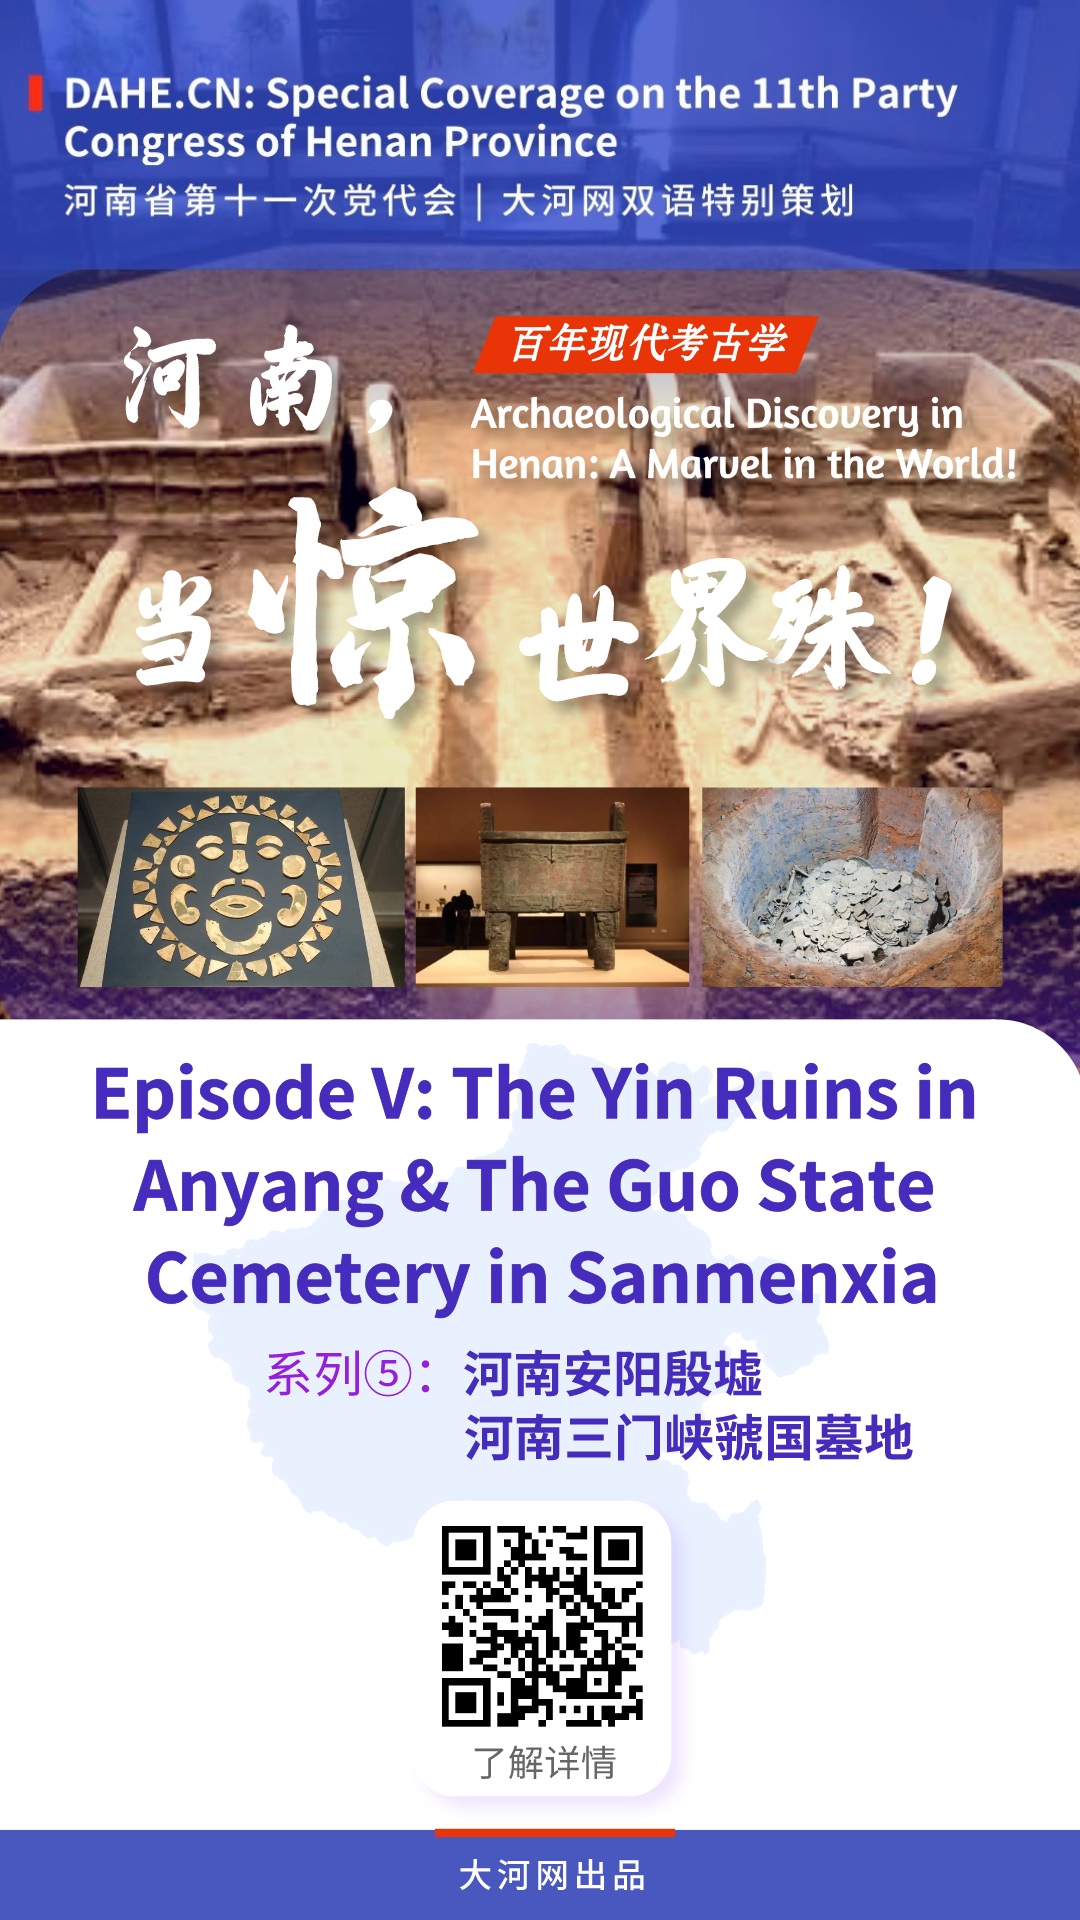 Special Coverage on Party Congress | Episode V: The Yin Ruins in Anyang & The Guo State Cemetery in Sanmenxia